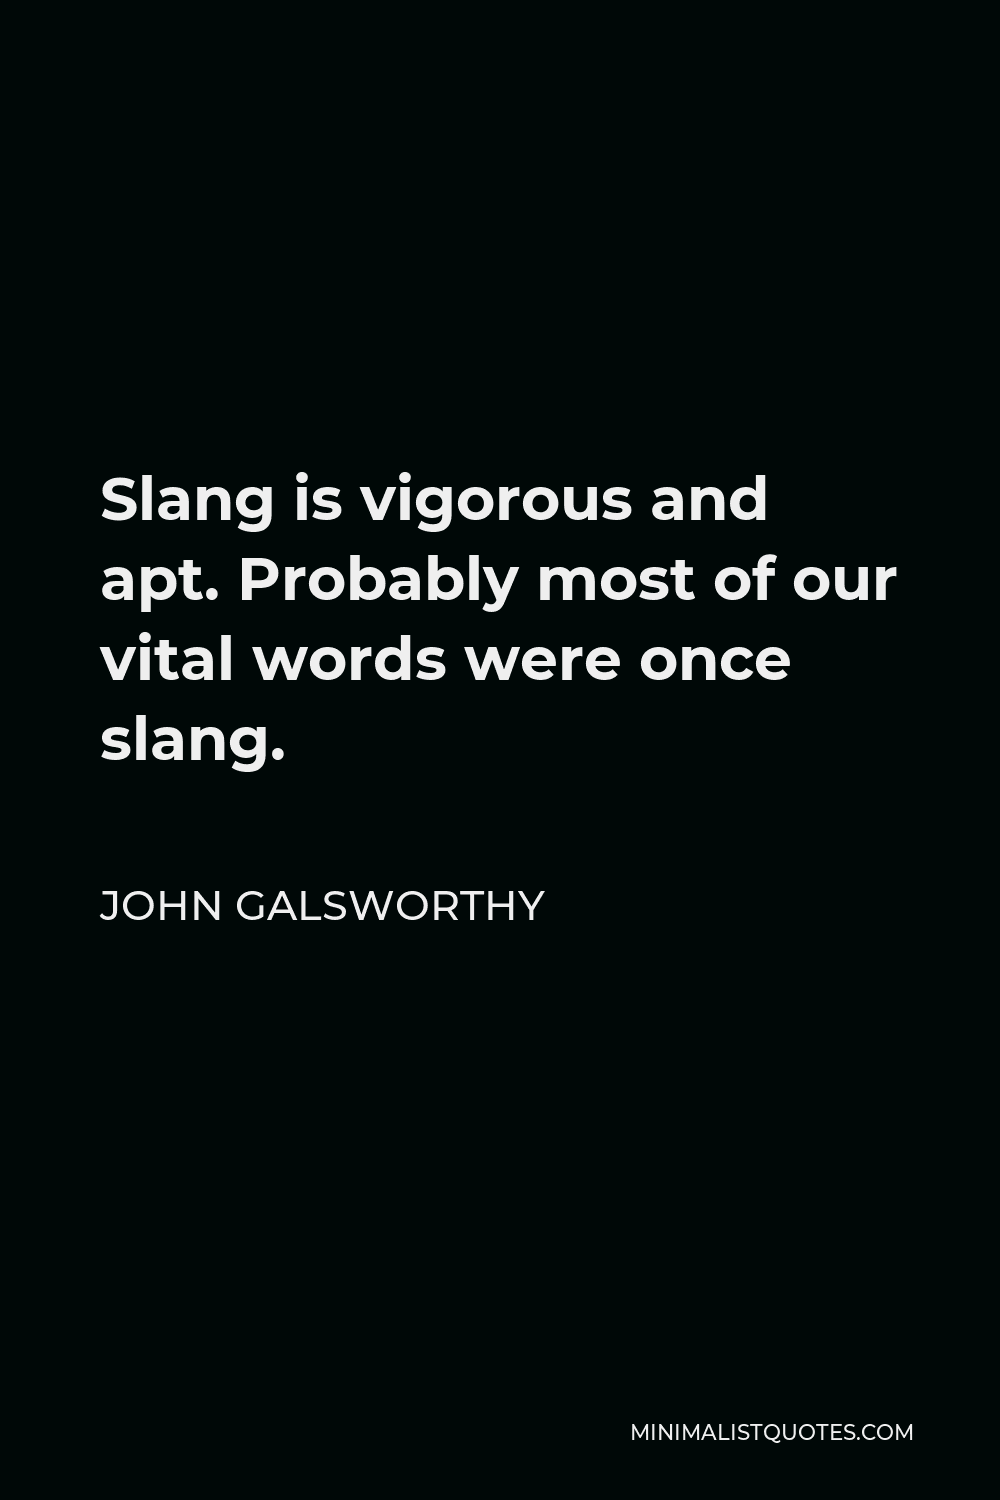 John Galsworthy Quote - Slang is vigorous and apt. Probably most of our vital words were once slang.